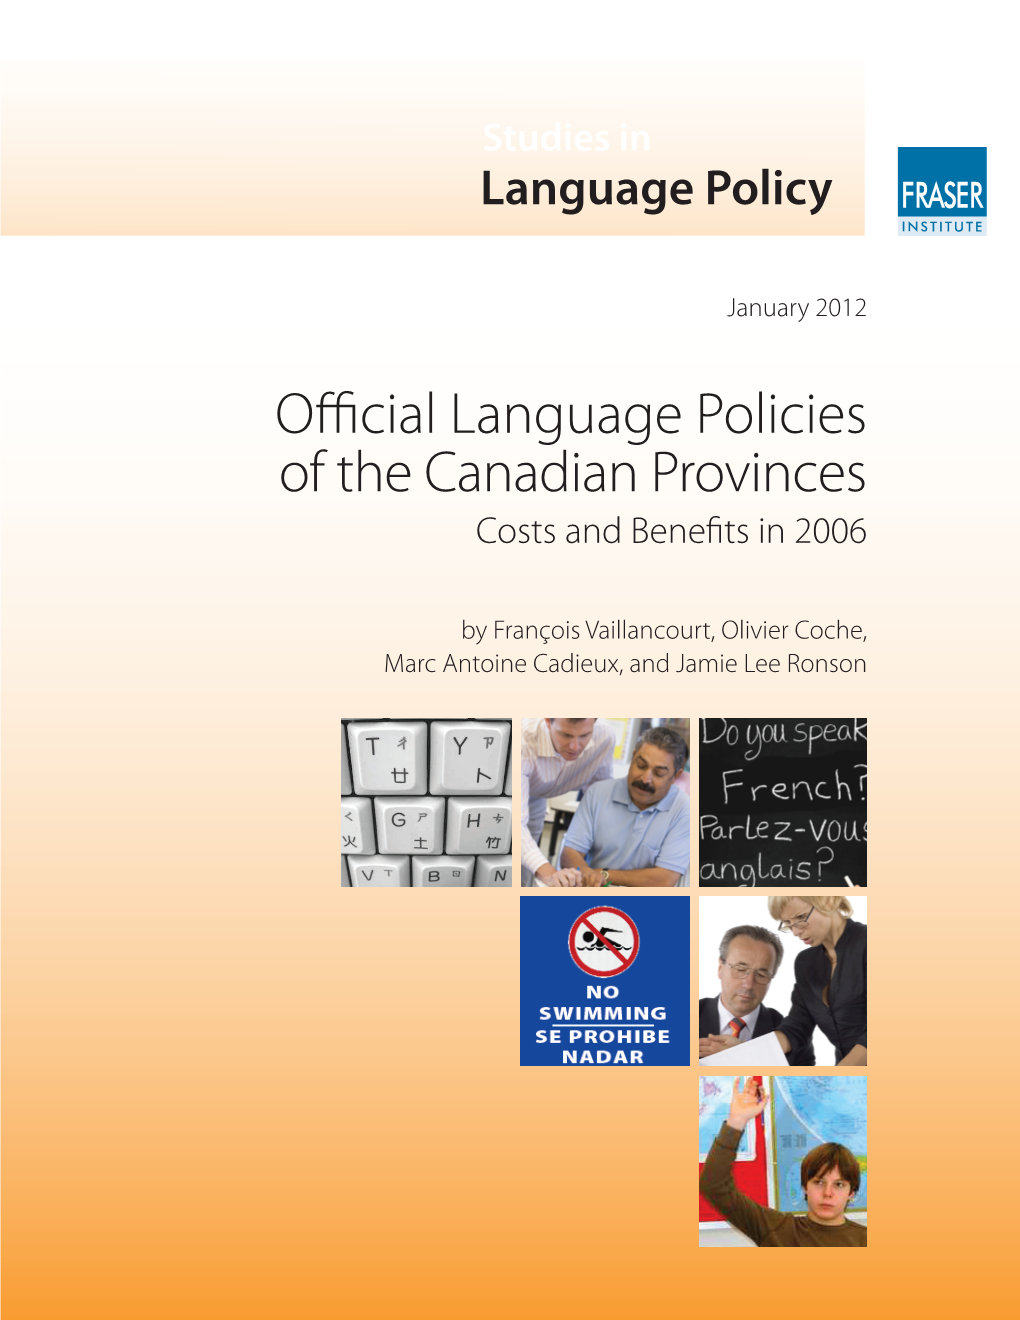 Official Language Policies of the Canadian Provinces Costs and Benefits in 2006